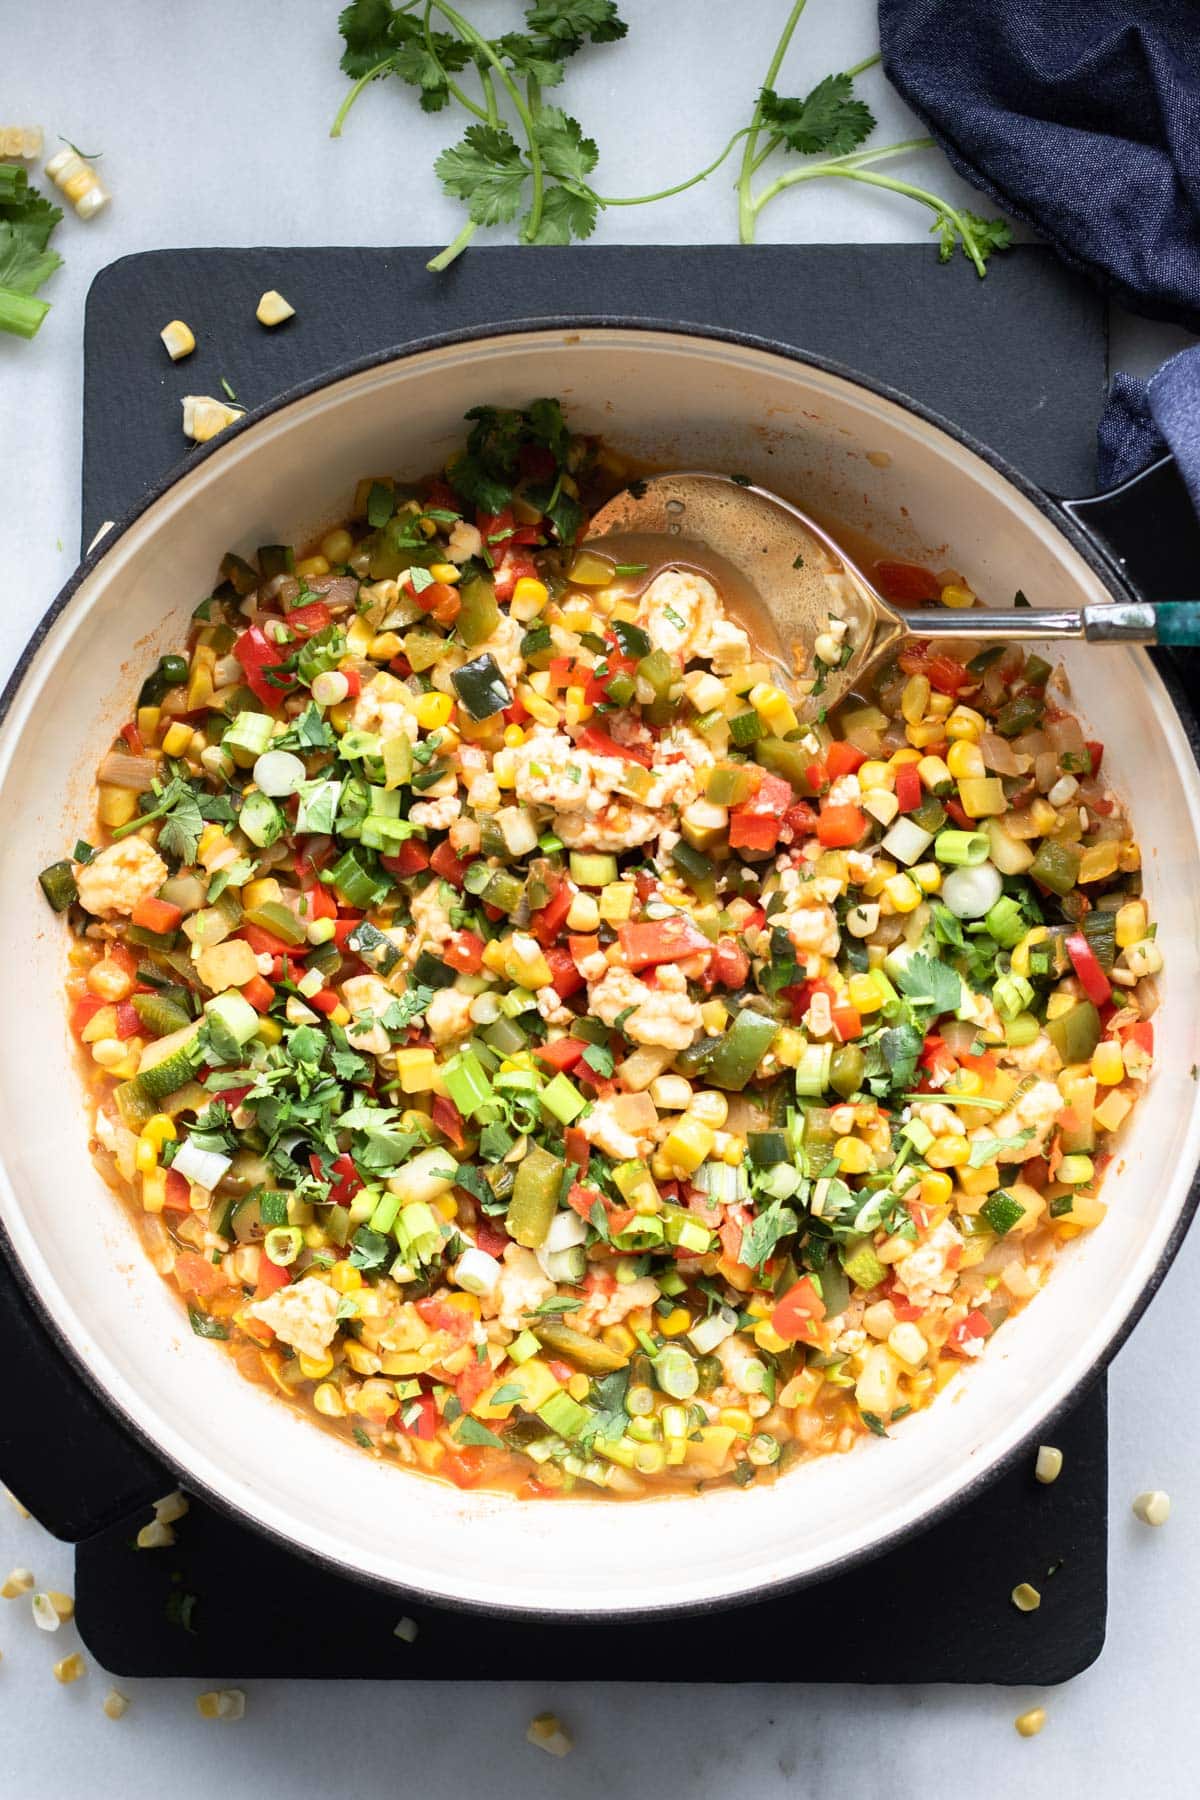 large pan of finely diced veggies with queso fresco on top, calabacitas